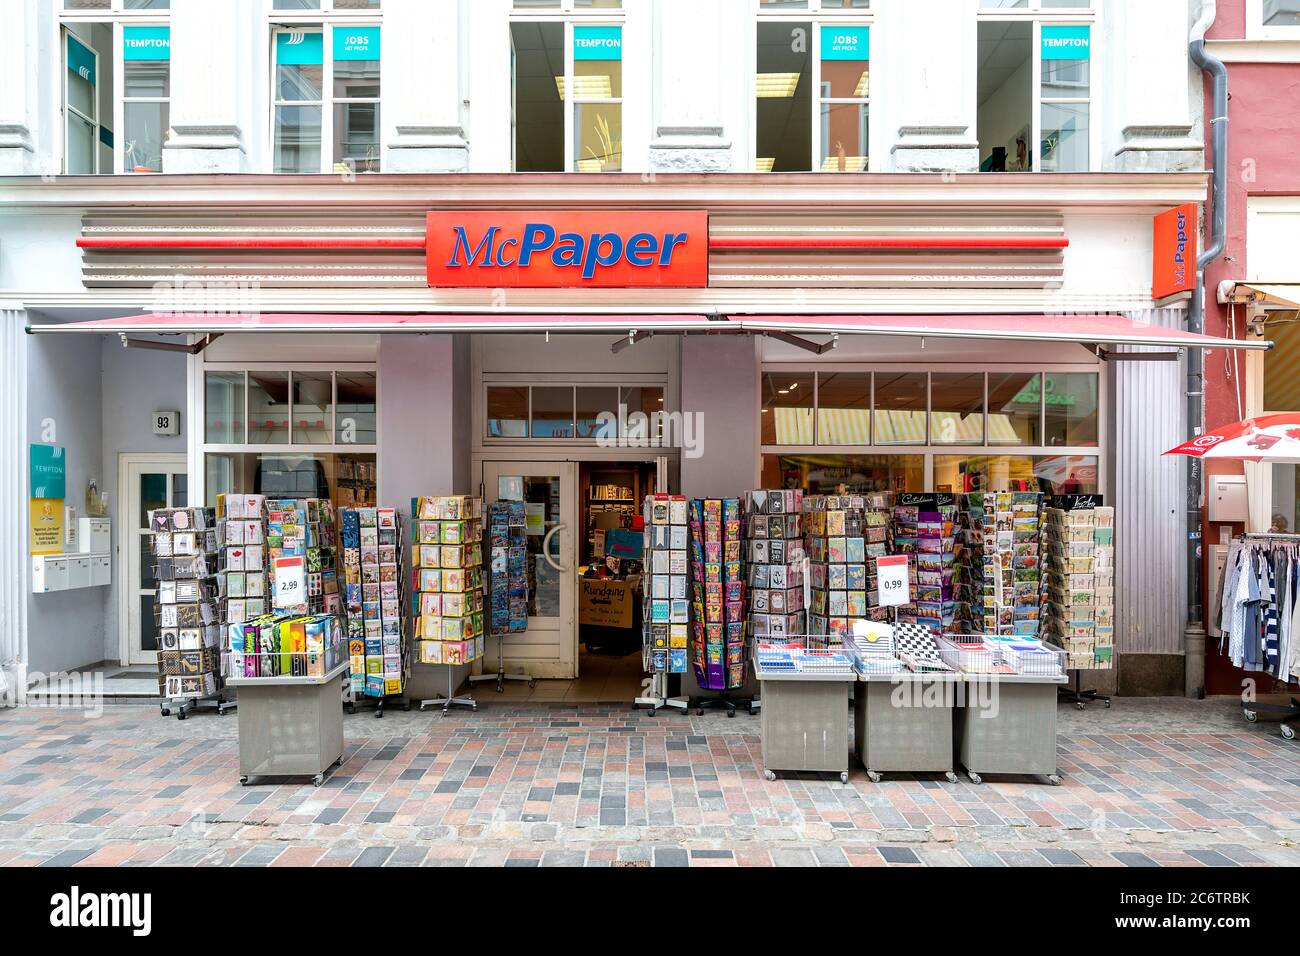 McPaper store in Rostock, Germany. McPaper is the market leader in German paper and stationery stores. Stock Photo